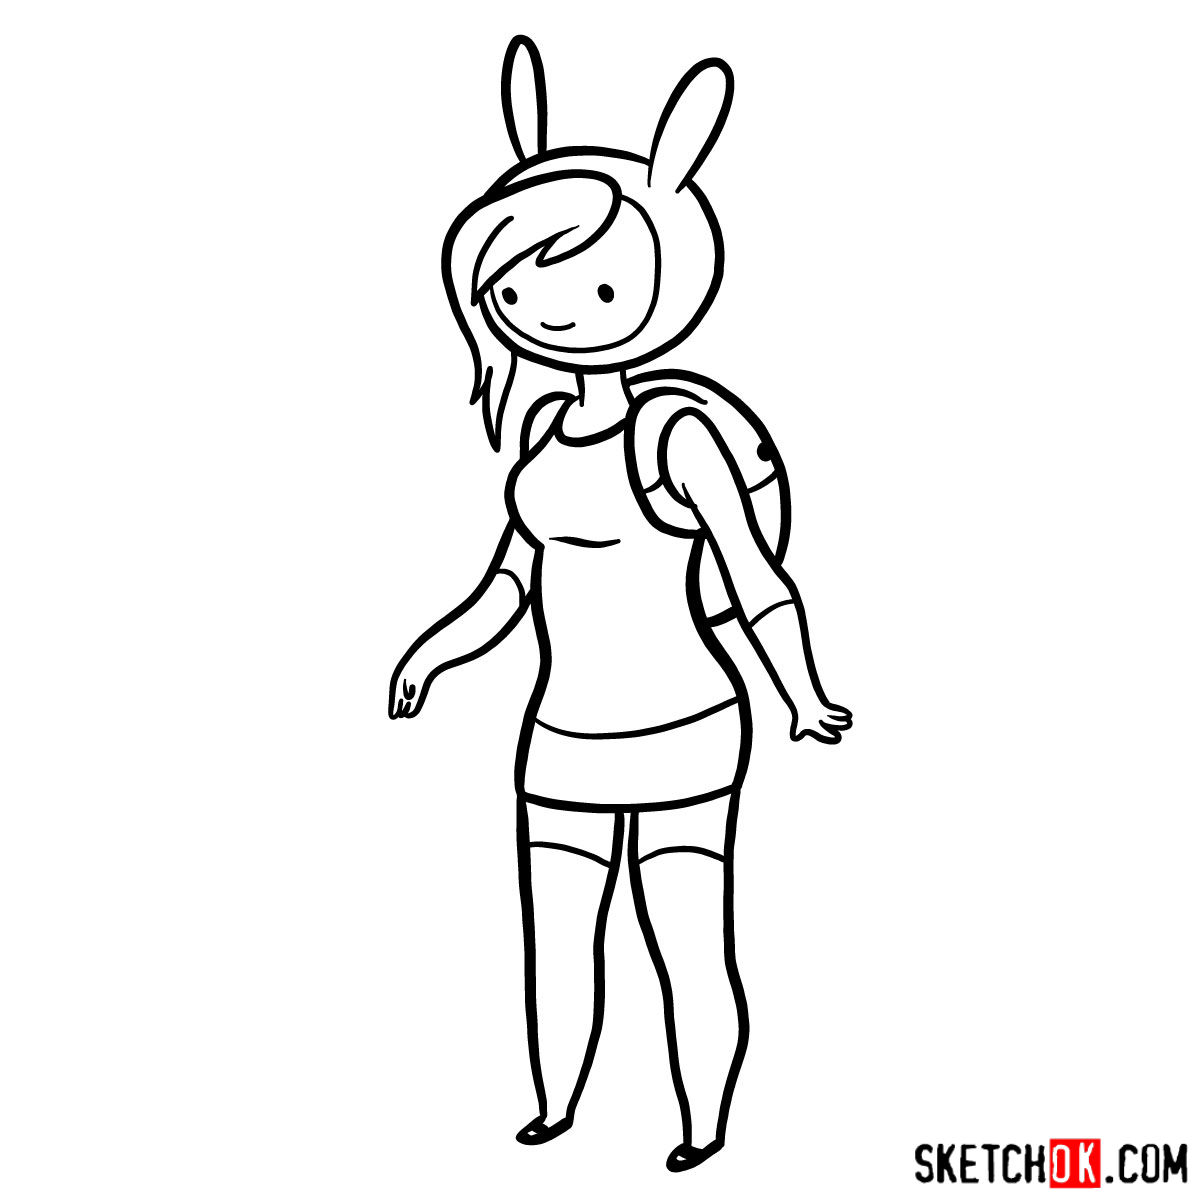 How to draw Fionna from Adventure Time - step 12